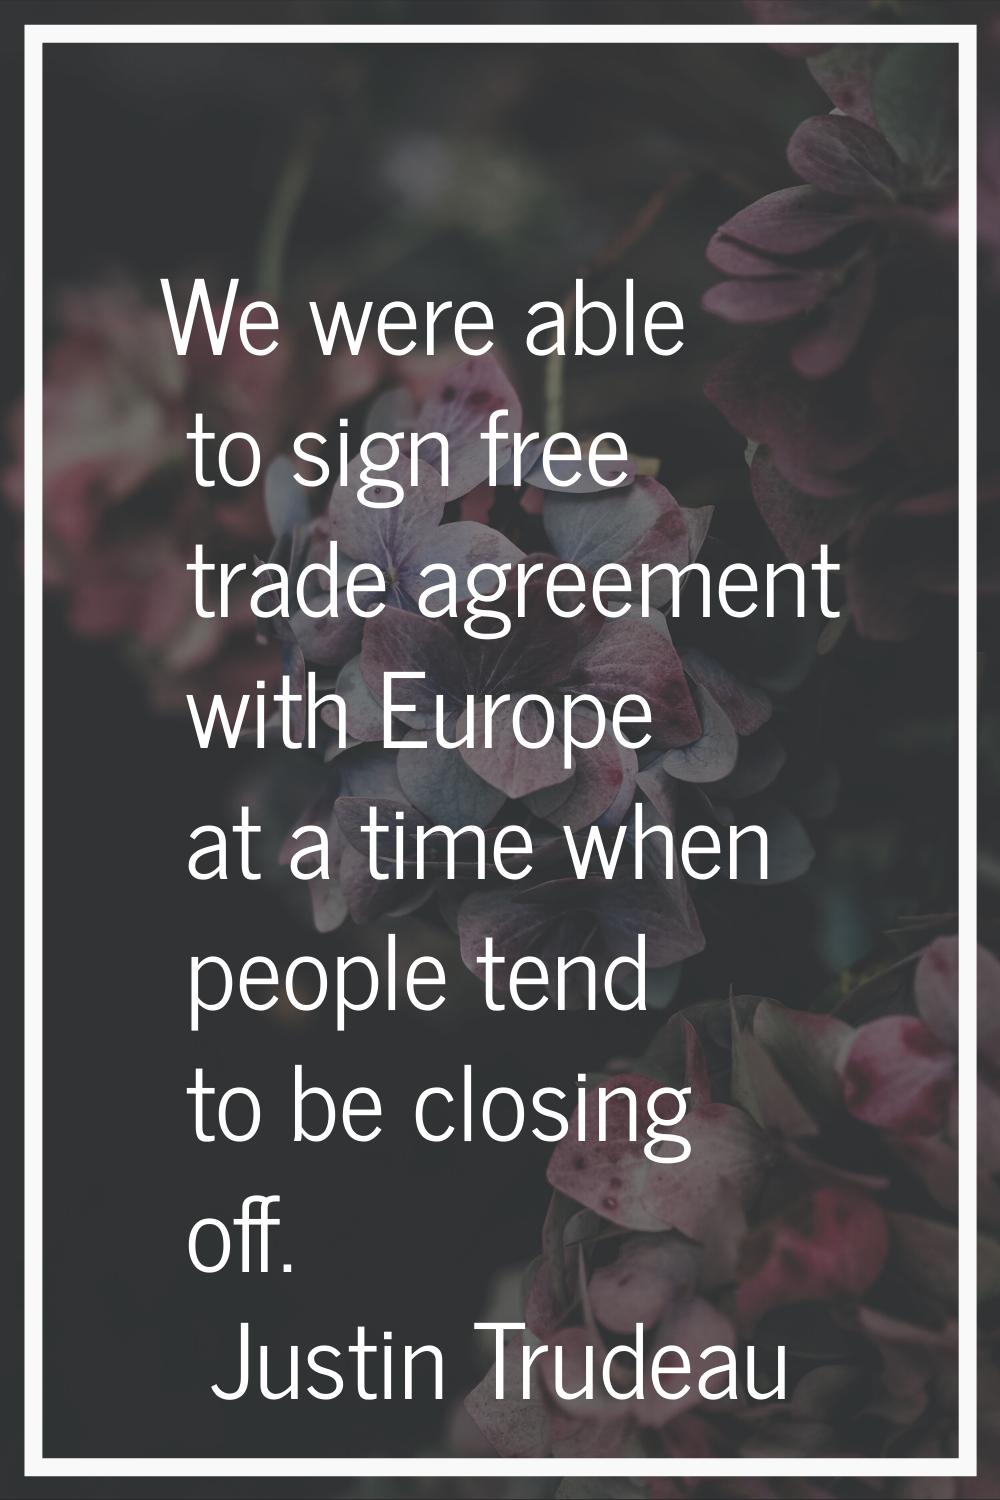 We were able to sign free trade agreement with Europe at a time when people tend to be closing off.